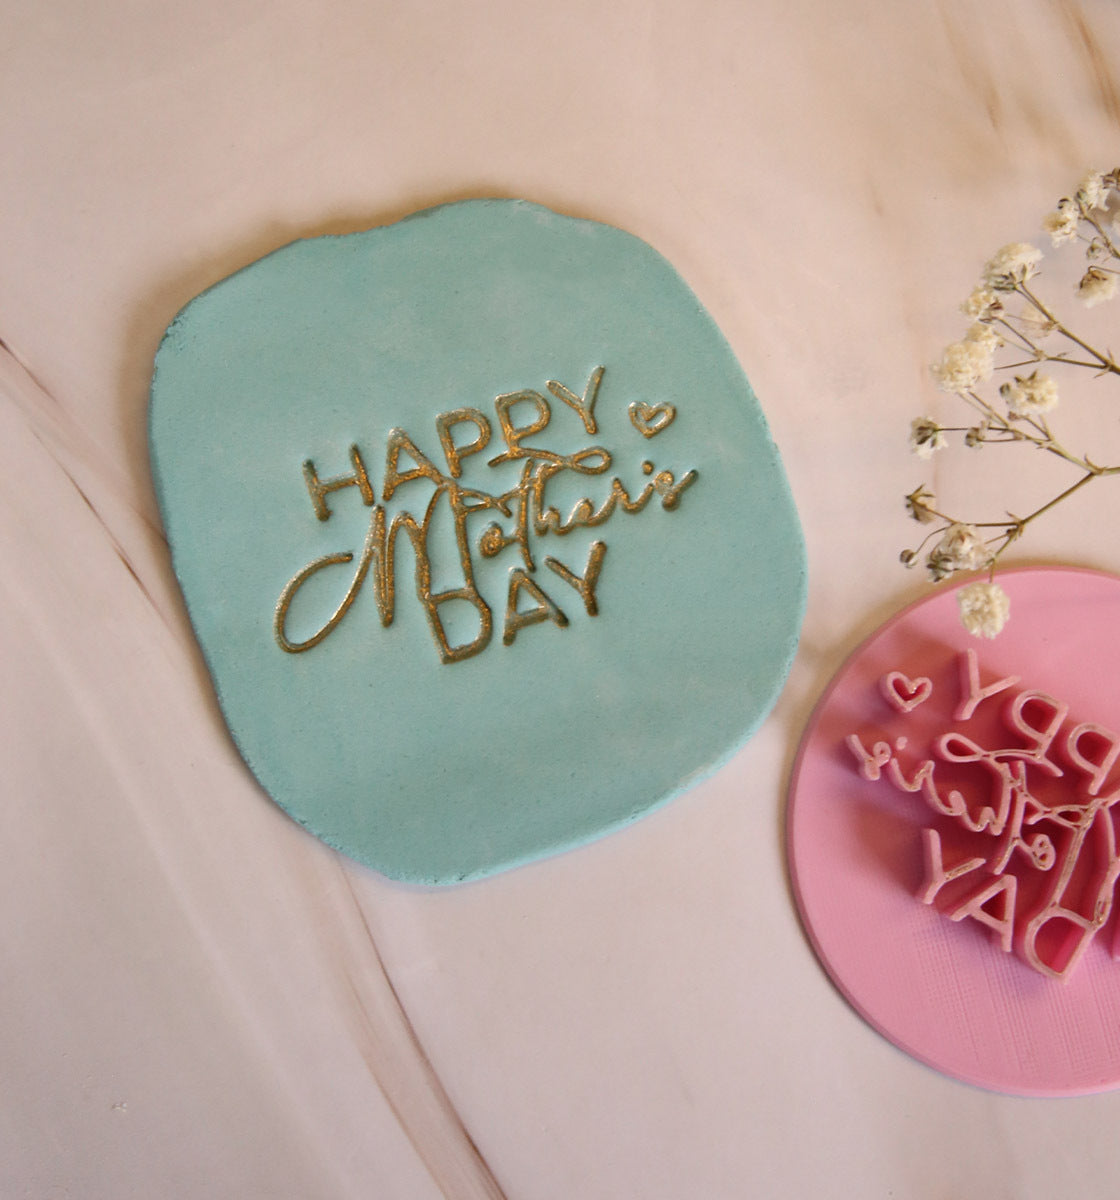 Happy Mother's Day - Cake Stamp